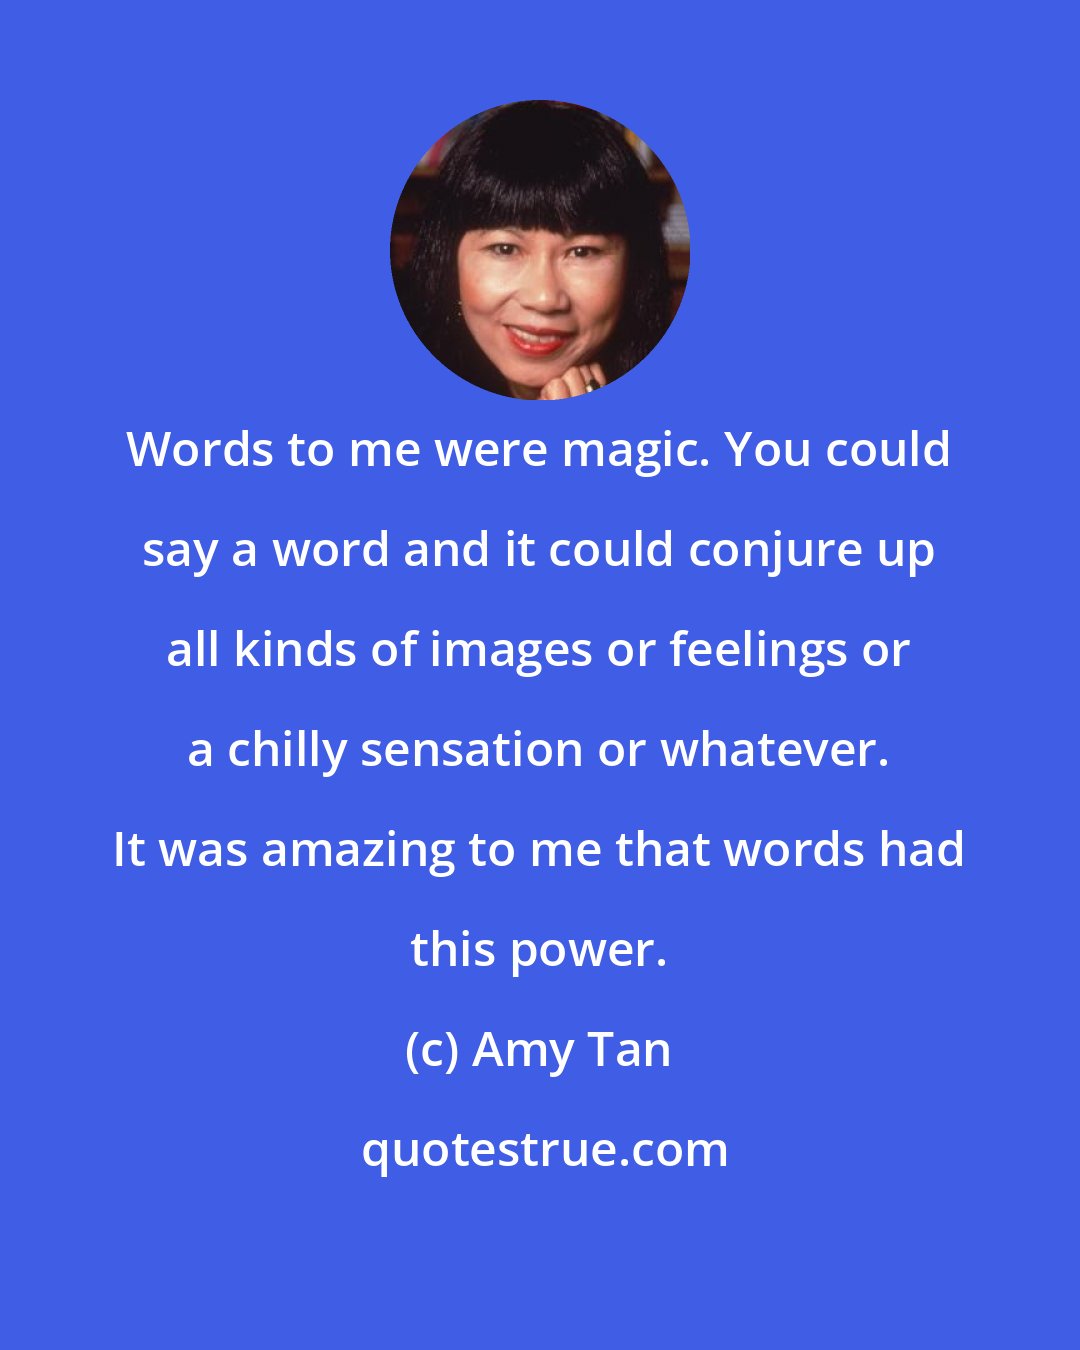 Amy Tan: Words to me were magic. You could say a word and it could conjure up all kinds of images or feelings or a chilly sensation or whatever. It was amazing to me that words had this power.